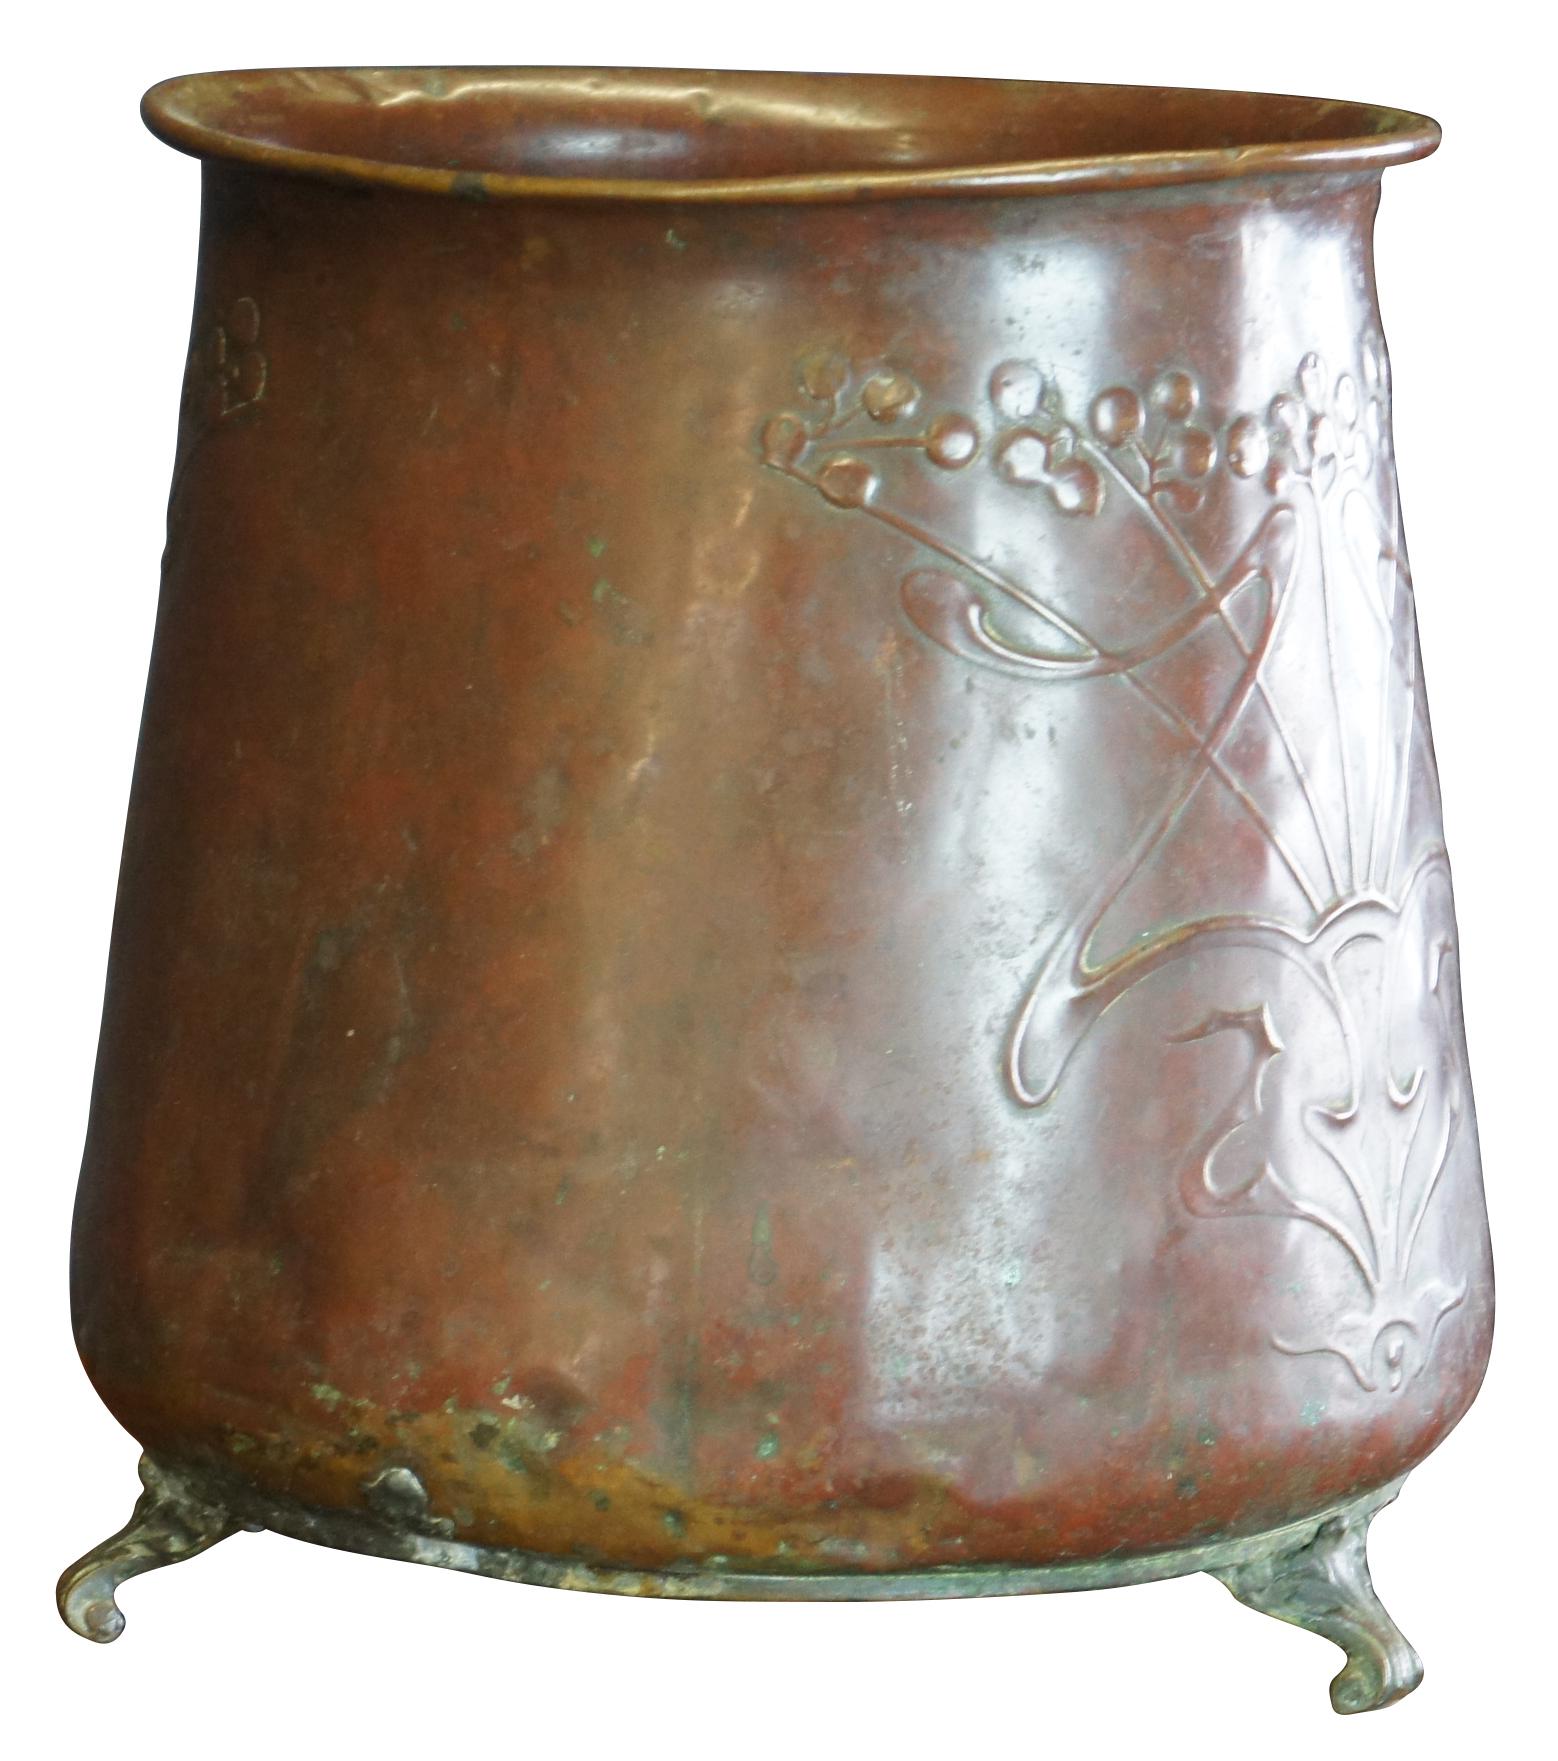 Antique Art Nouveau copper planter or jardiniere featuring an embossed design and tri footed base. Size: 10